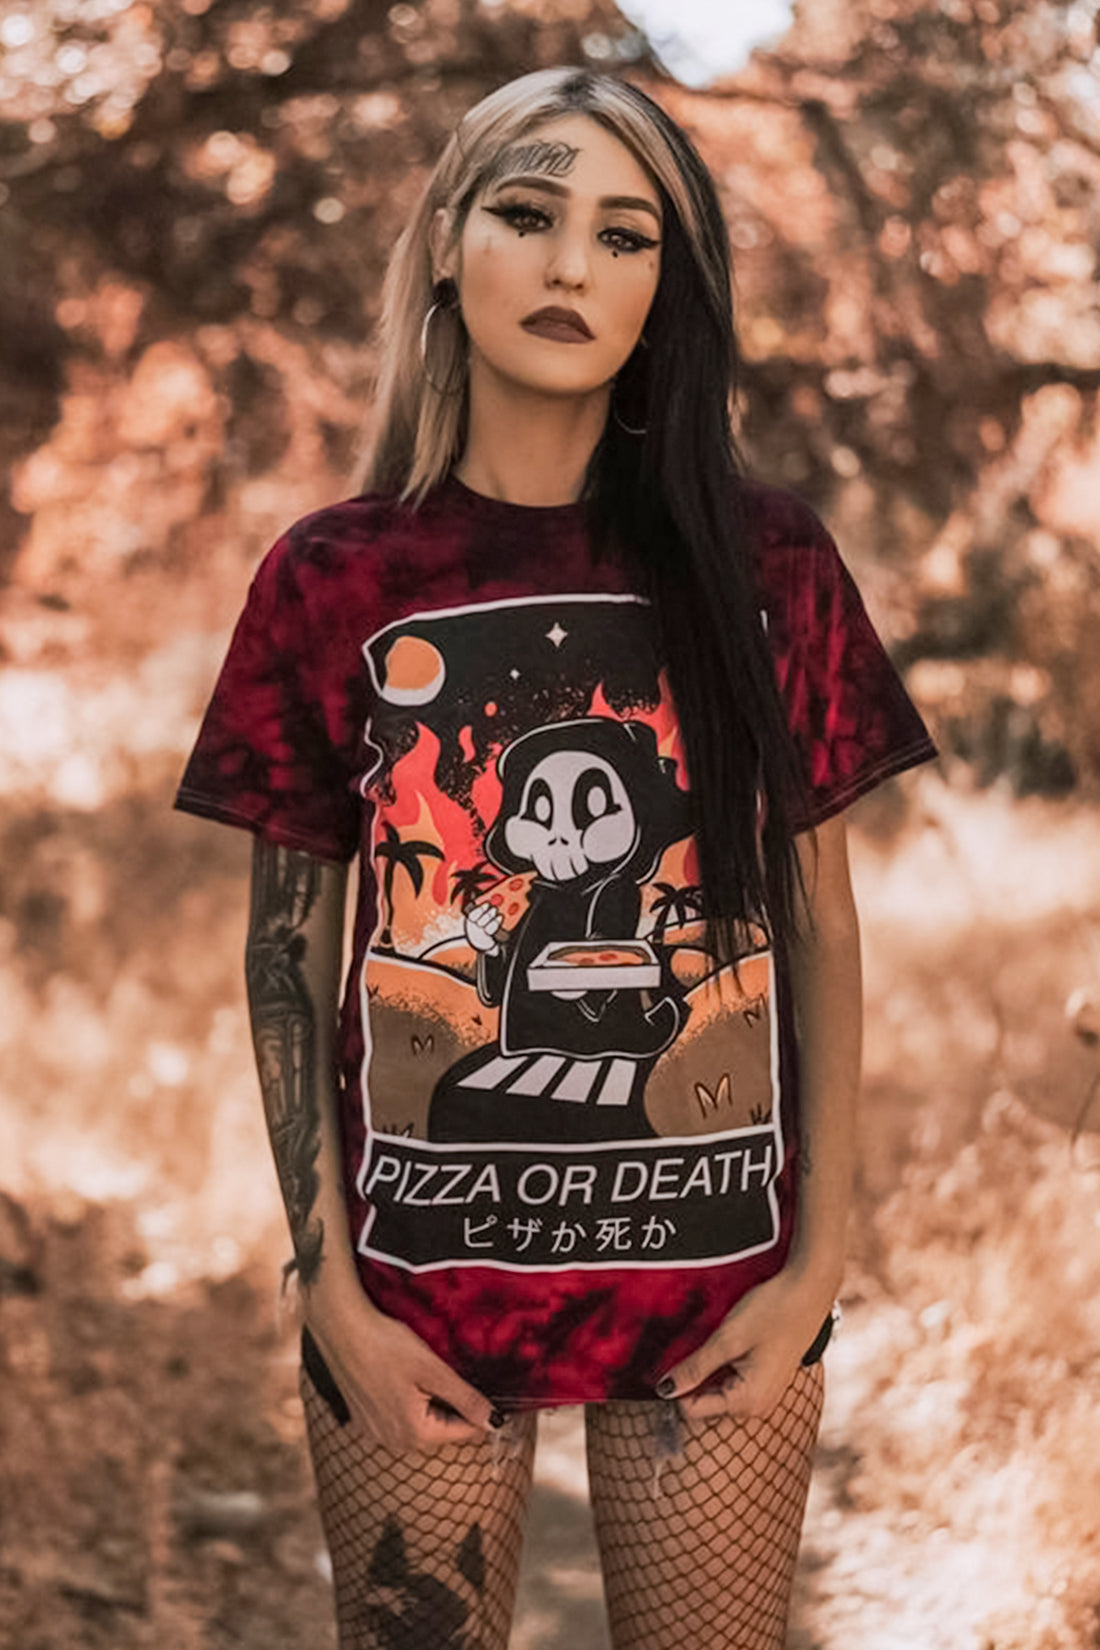 "Pizza or Death" Red Crystal Dyed Unisex T-Shirt